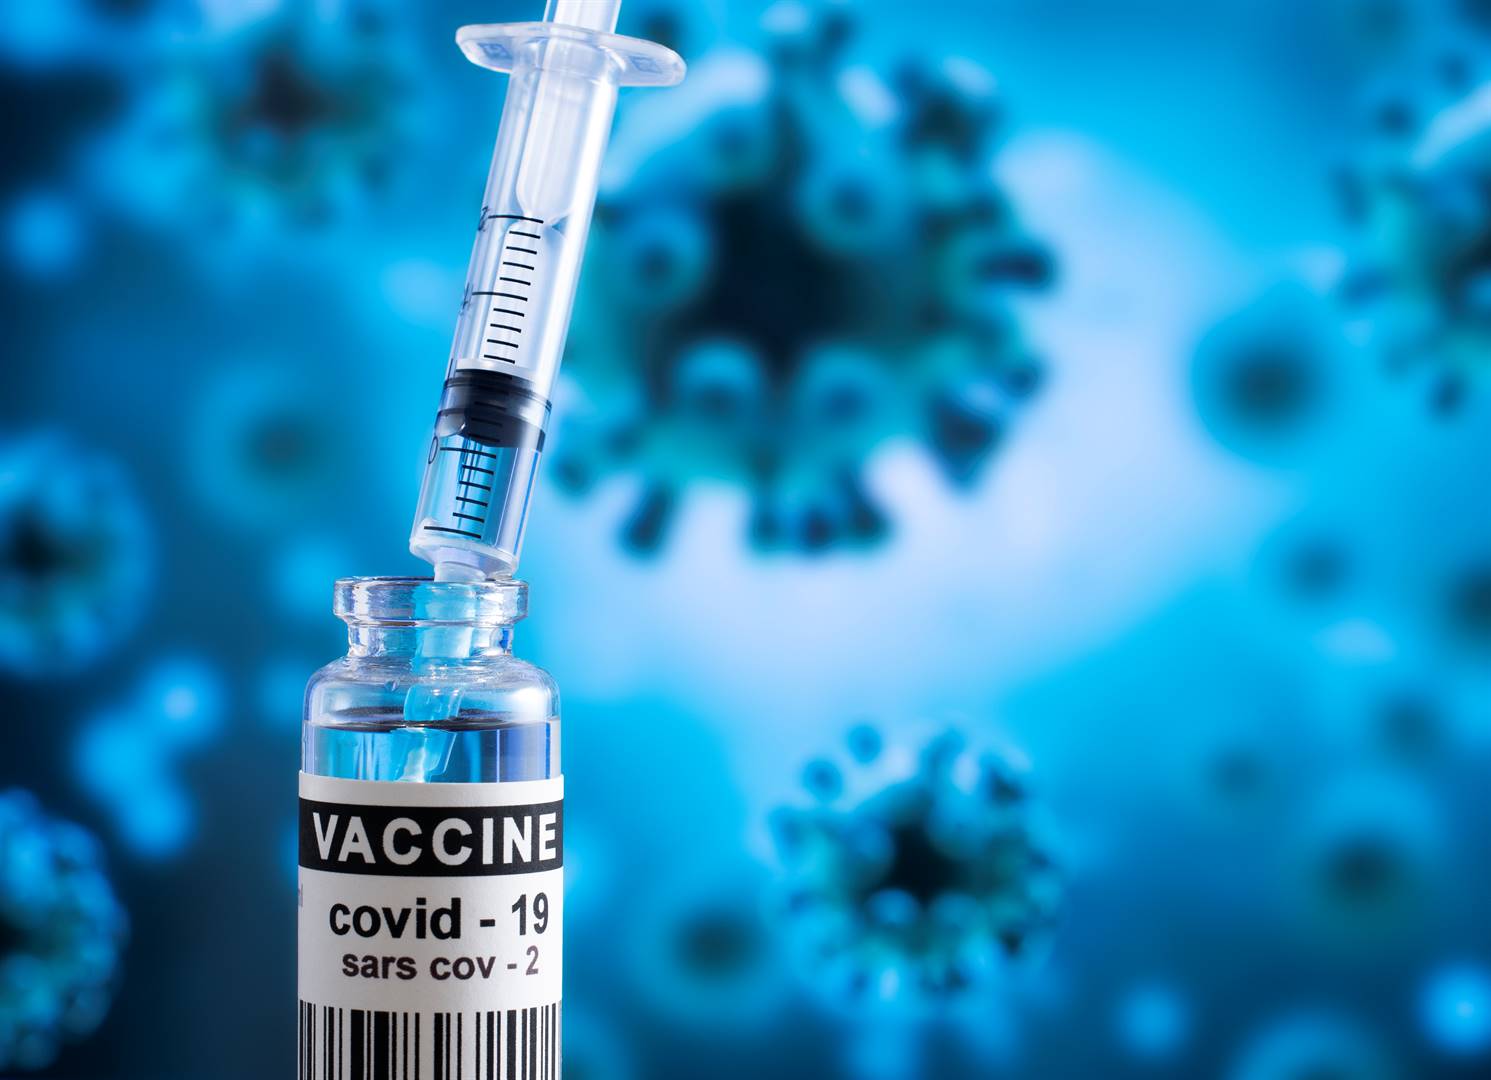 Inherent risks with the vaccine